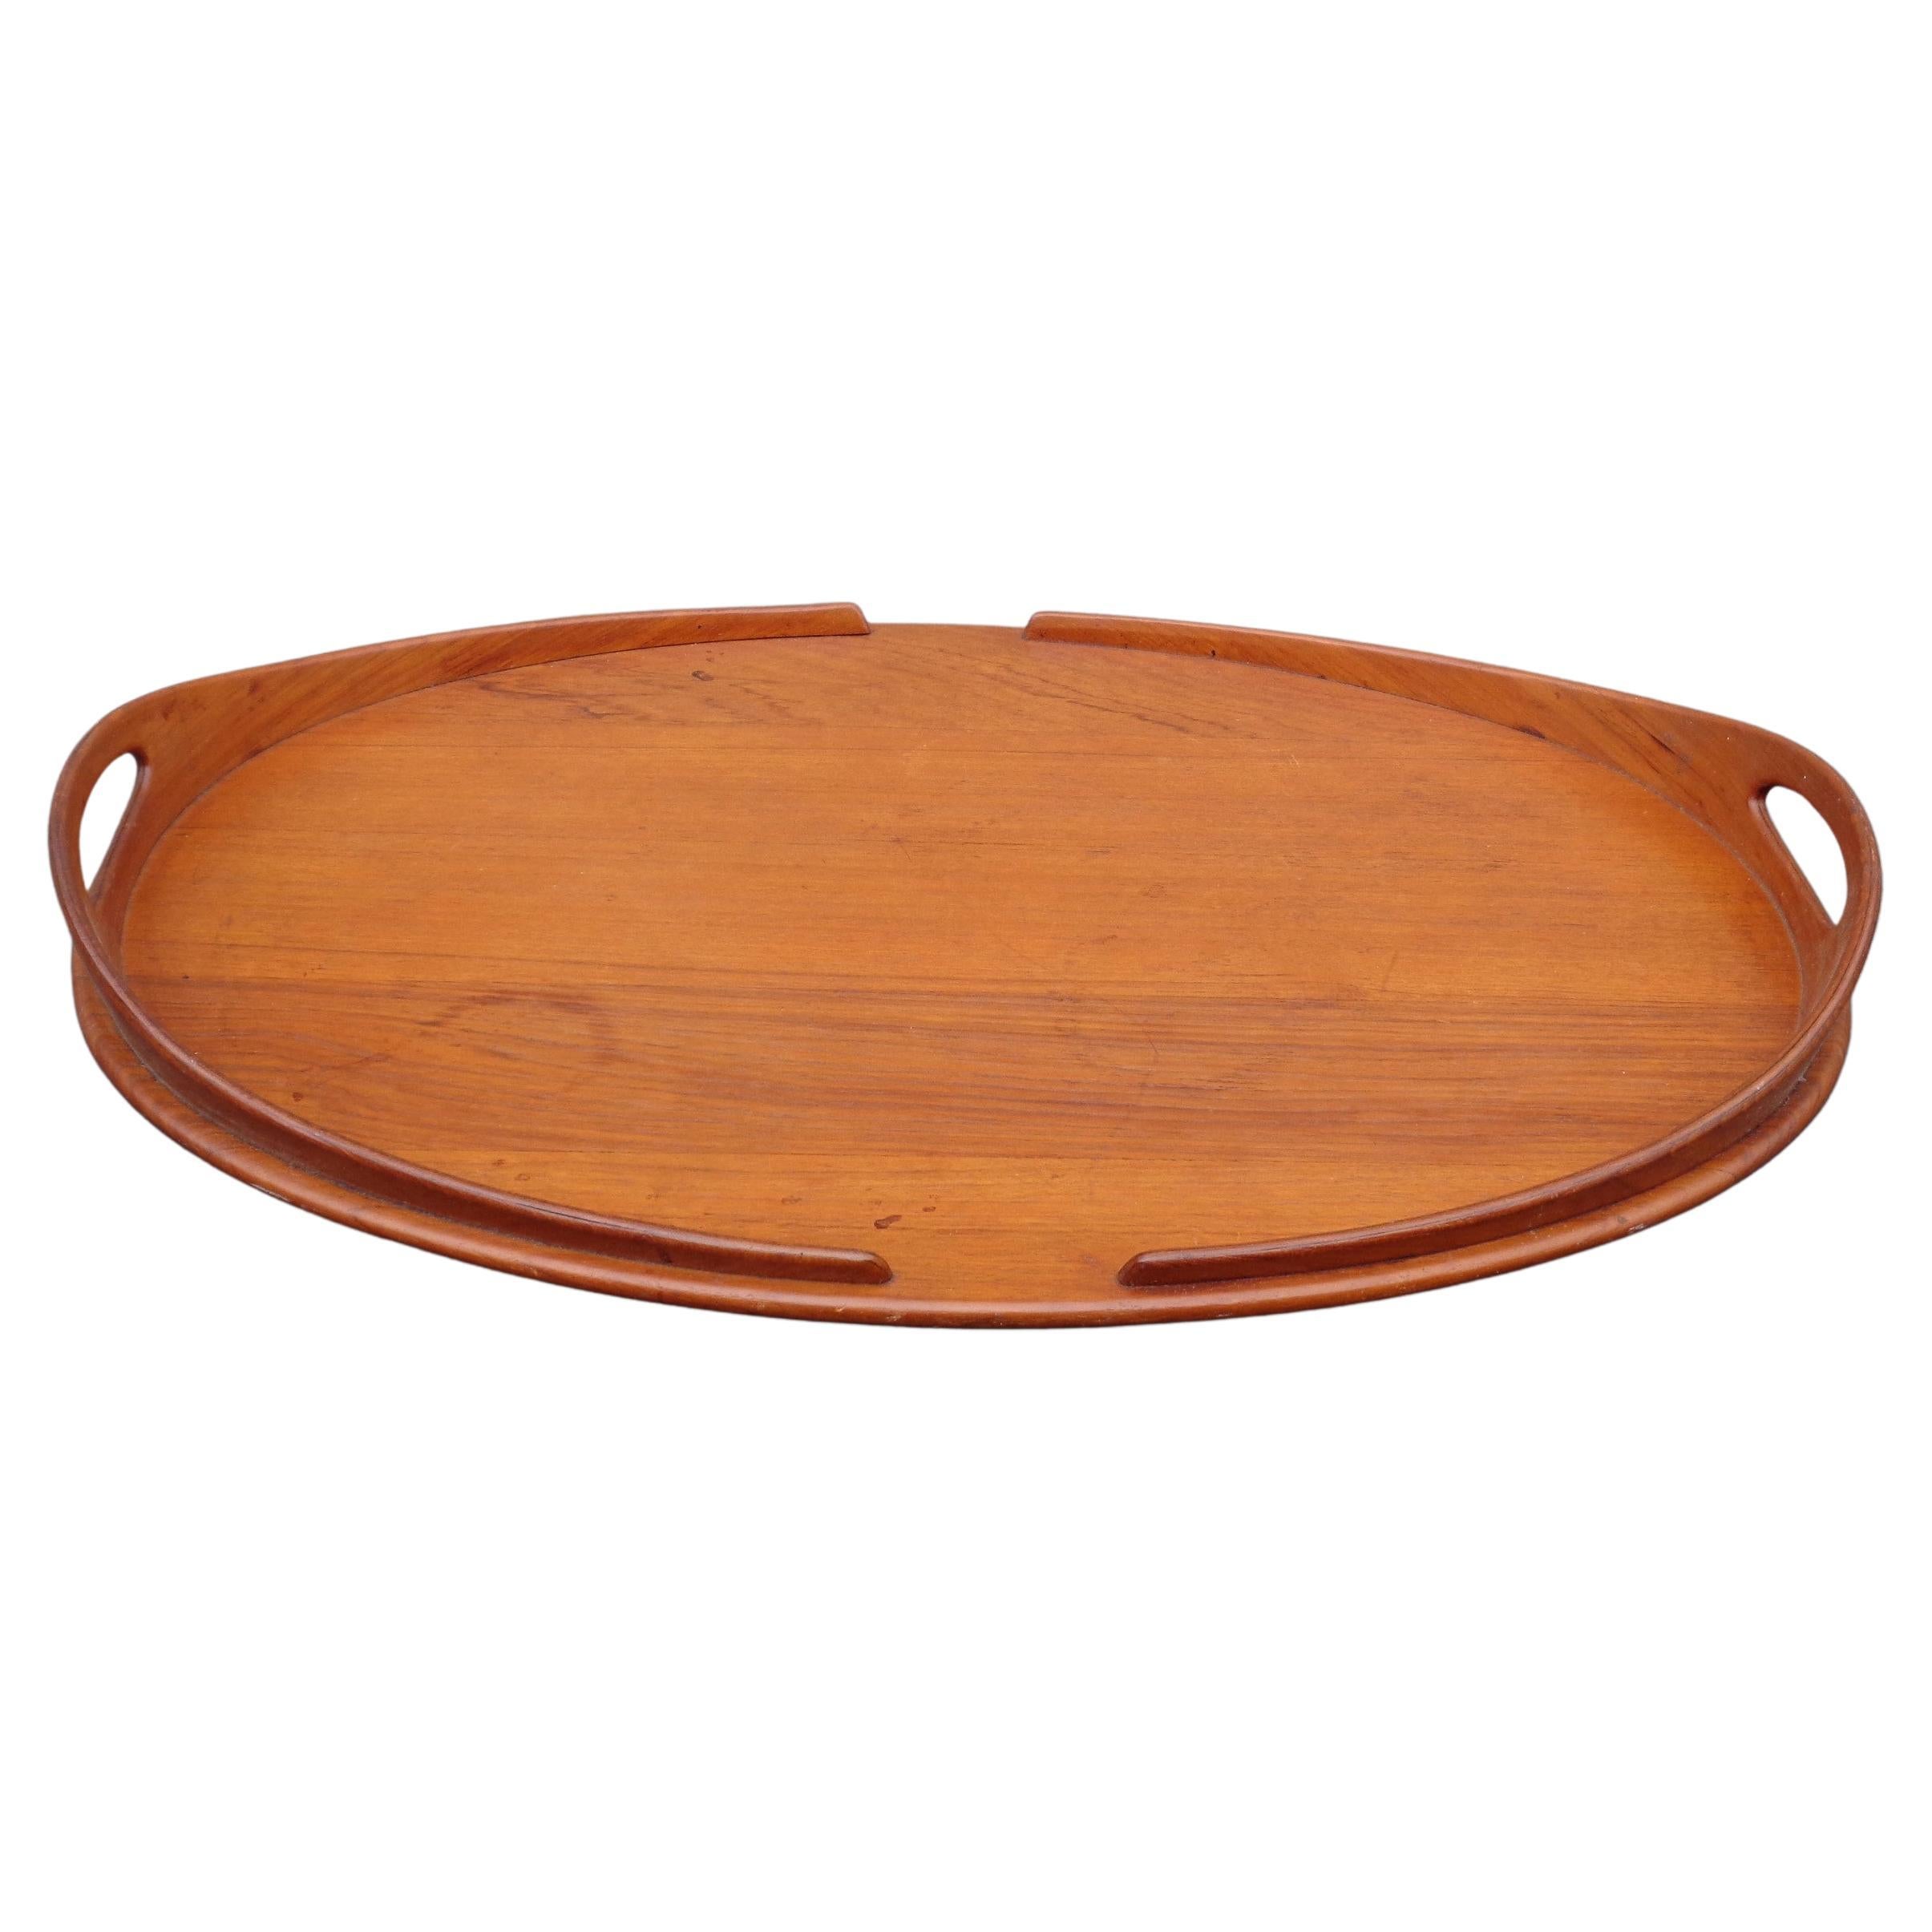 Large sculptural oval teak wood tray by Jens Quistgaard for Dansk, Denmark. Signed underside bottom with early production mark. Overall beautifully aged original glowing color and well figured grain. Circa 1950-1960. Carefully look at all pictures